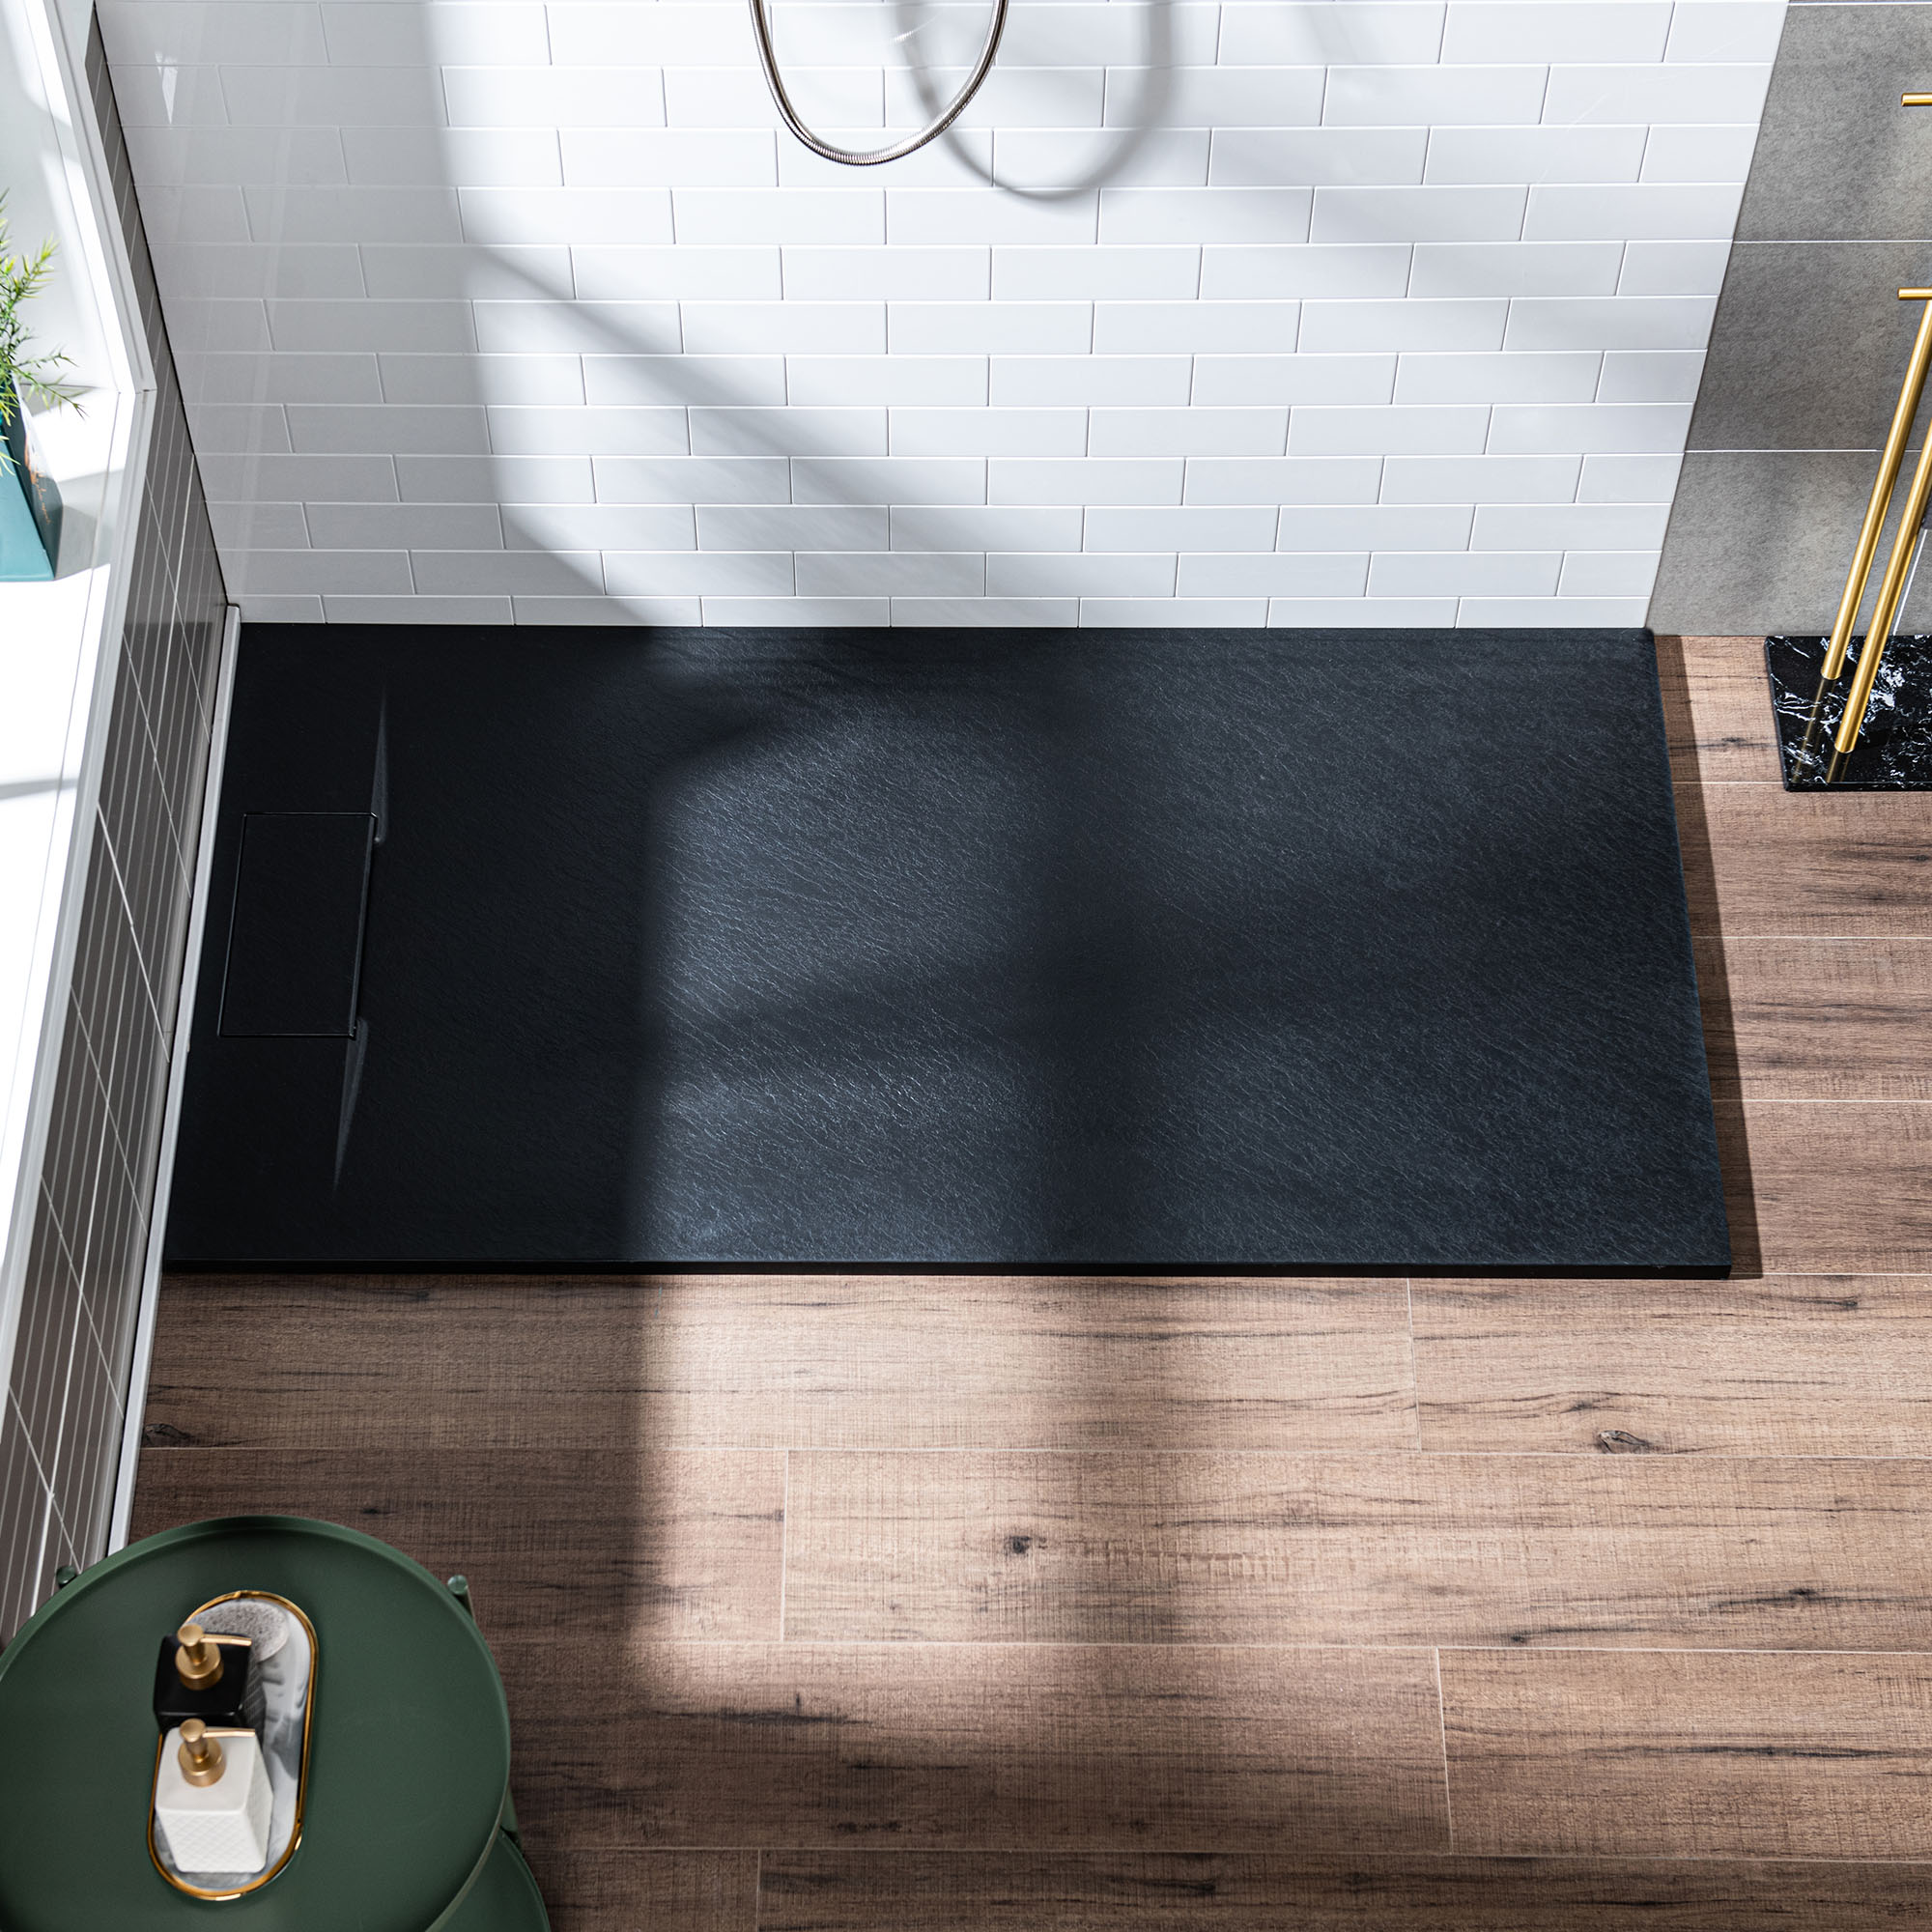  WOODBRIDGE 60-in L x 36-in W Zero Threshold End Drain Shower Base with Reversable Drain Placement, Matching Decorative Drain Plate and Tile Flange, Wheel Chair Access, Low Profile, Black_12454